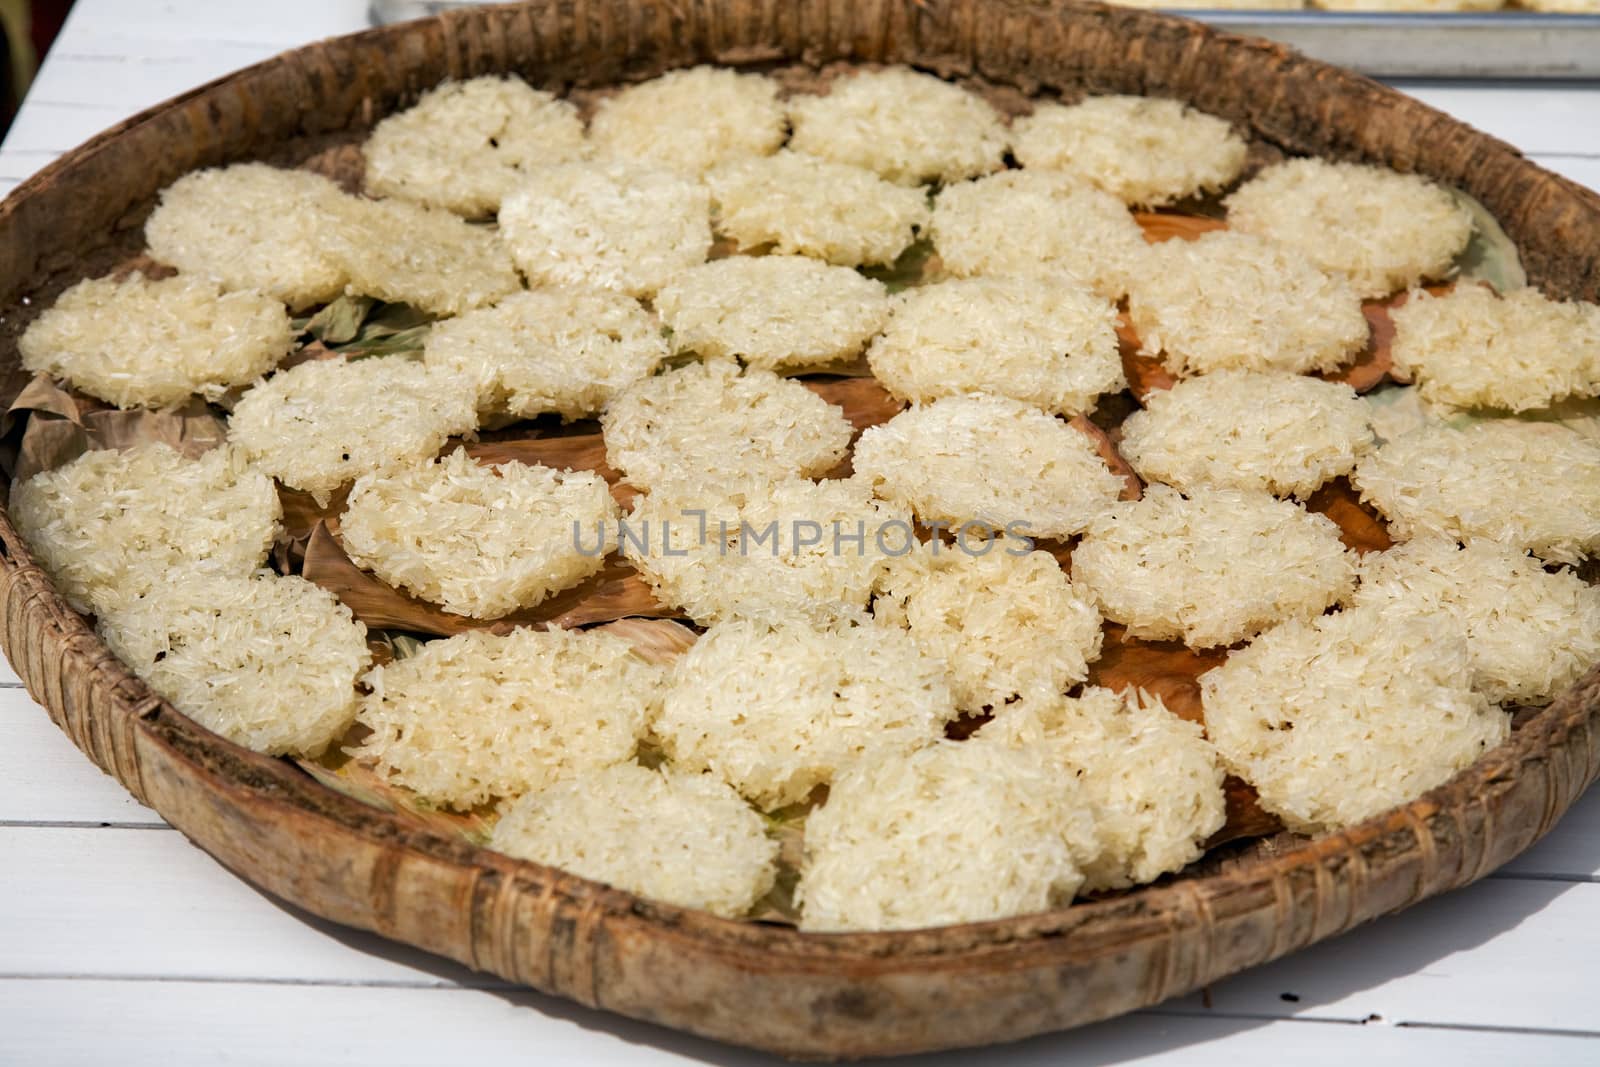 dried rice scone on twiggen plate in thailand